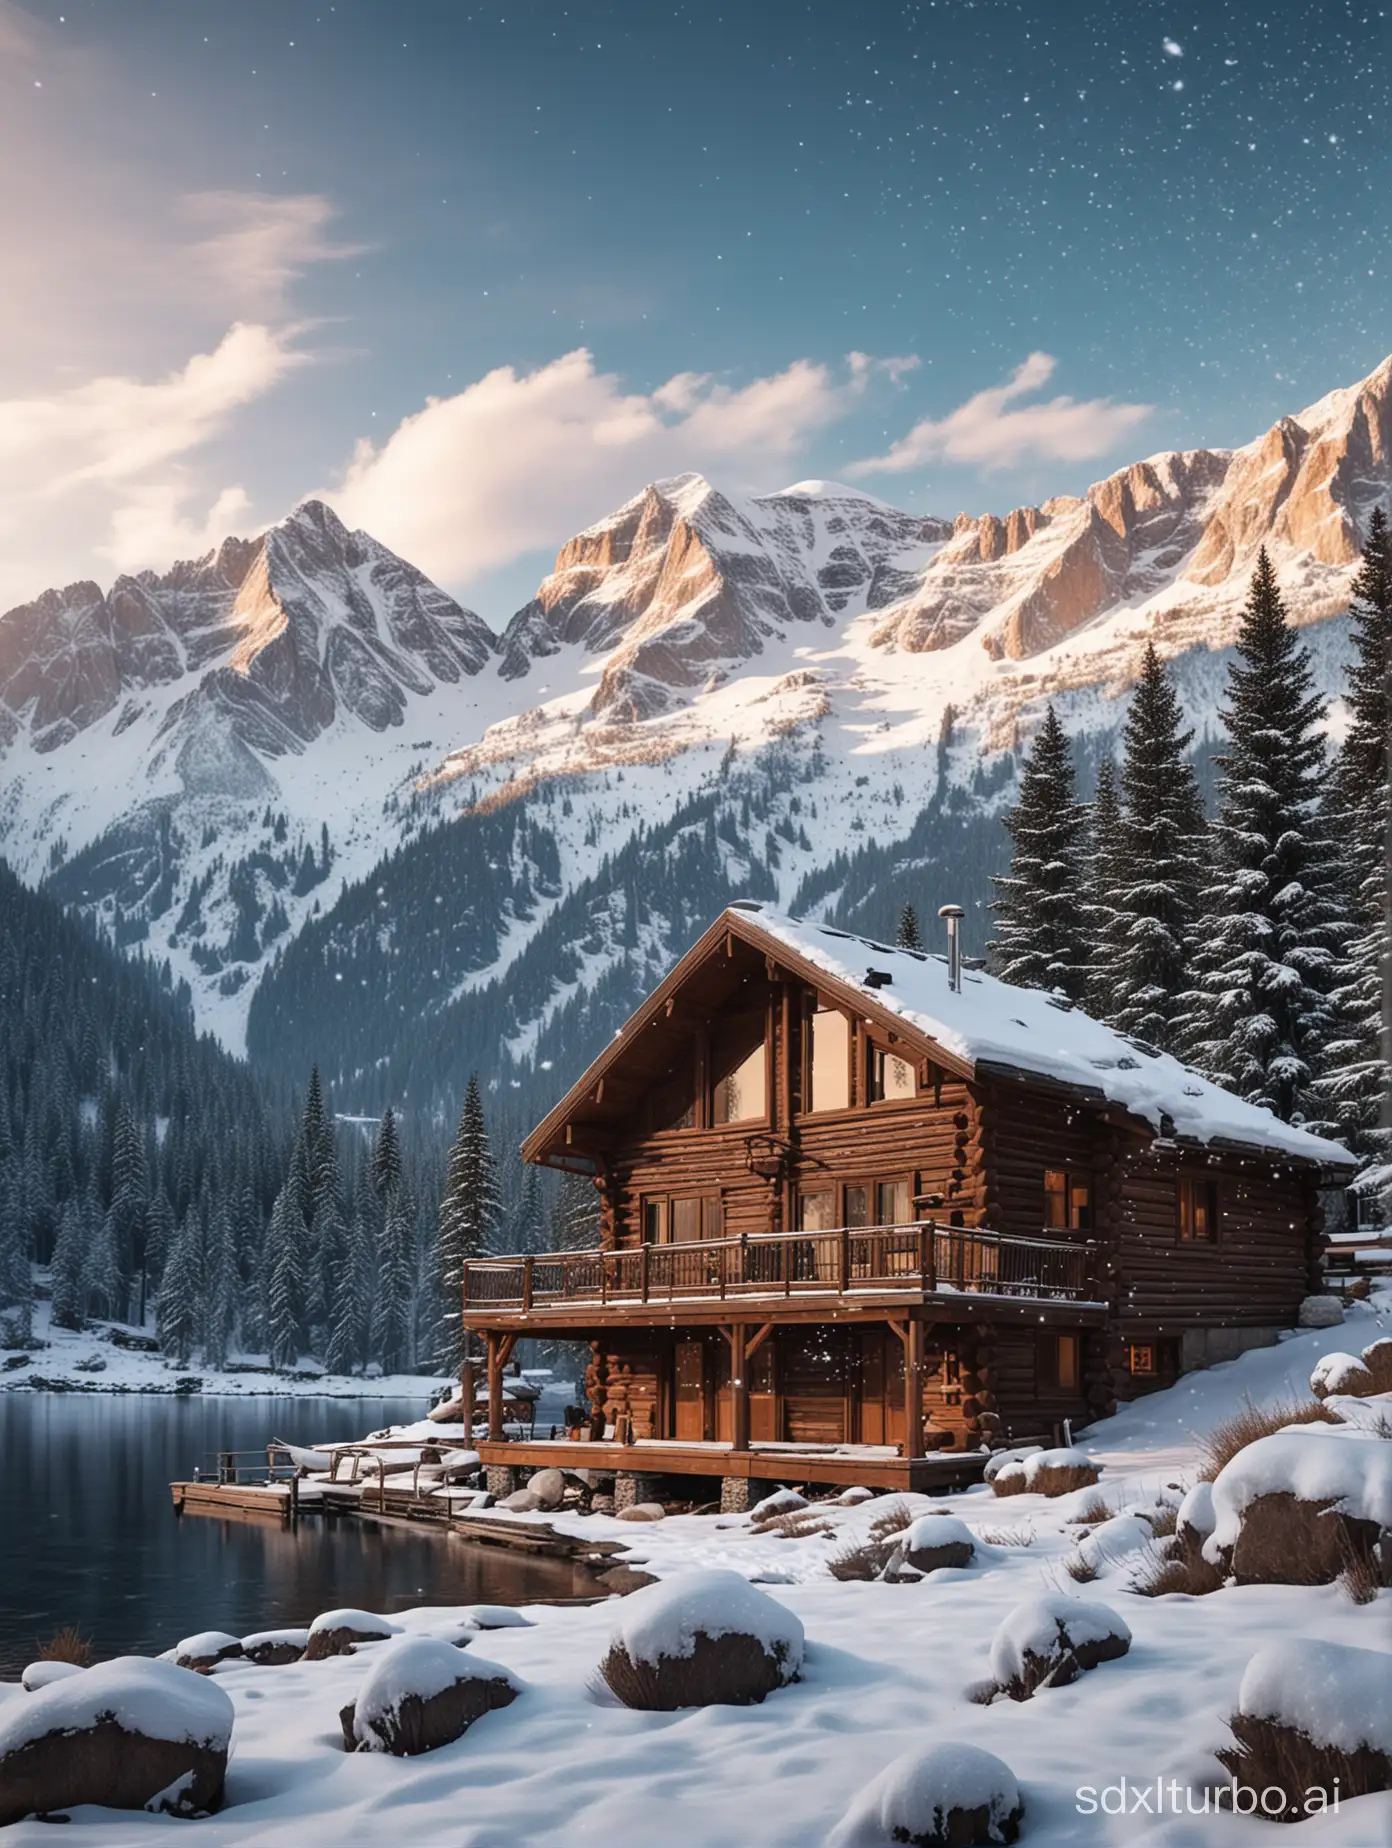 Cozy-Cabin-in-Snowy-Mountains-with-Falling-Snowflakes